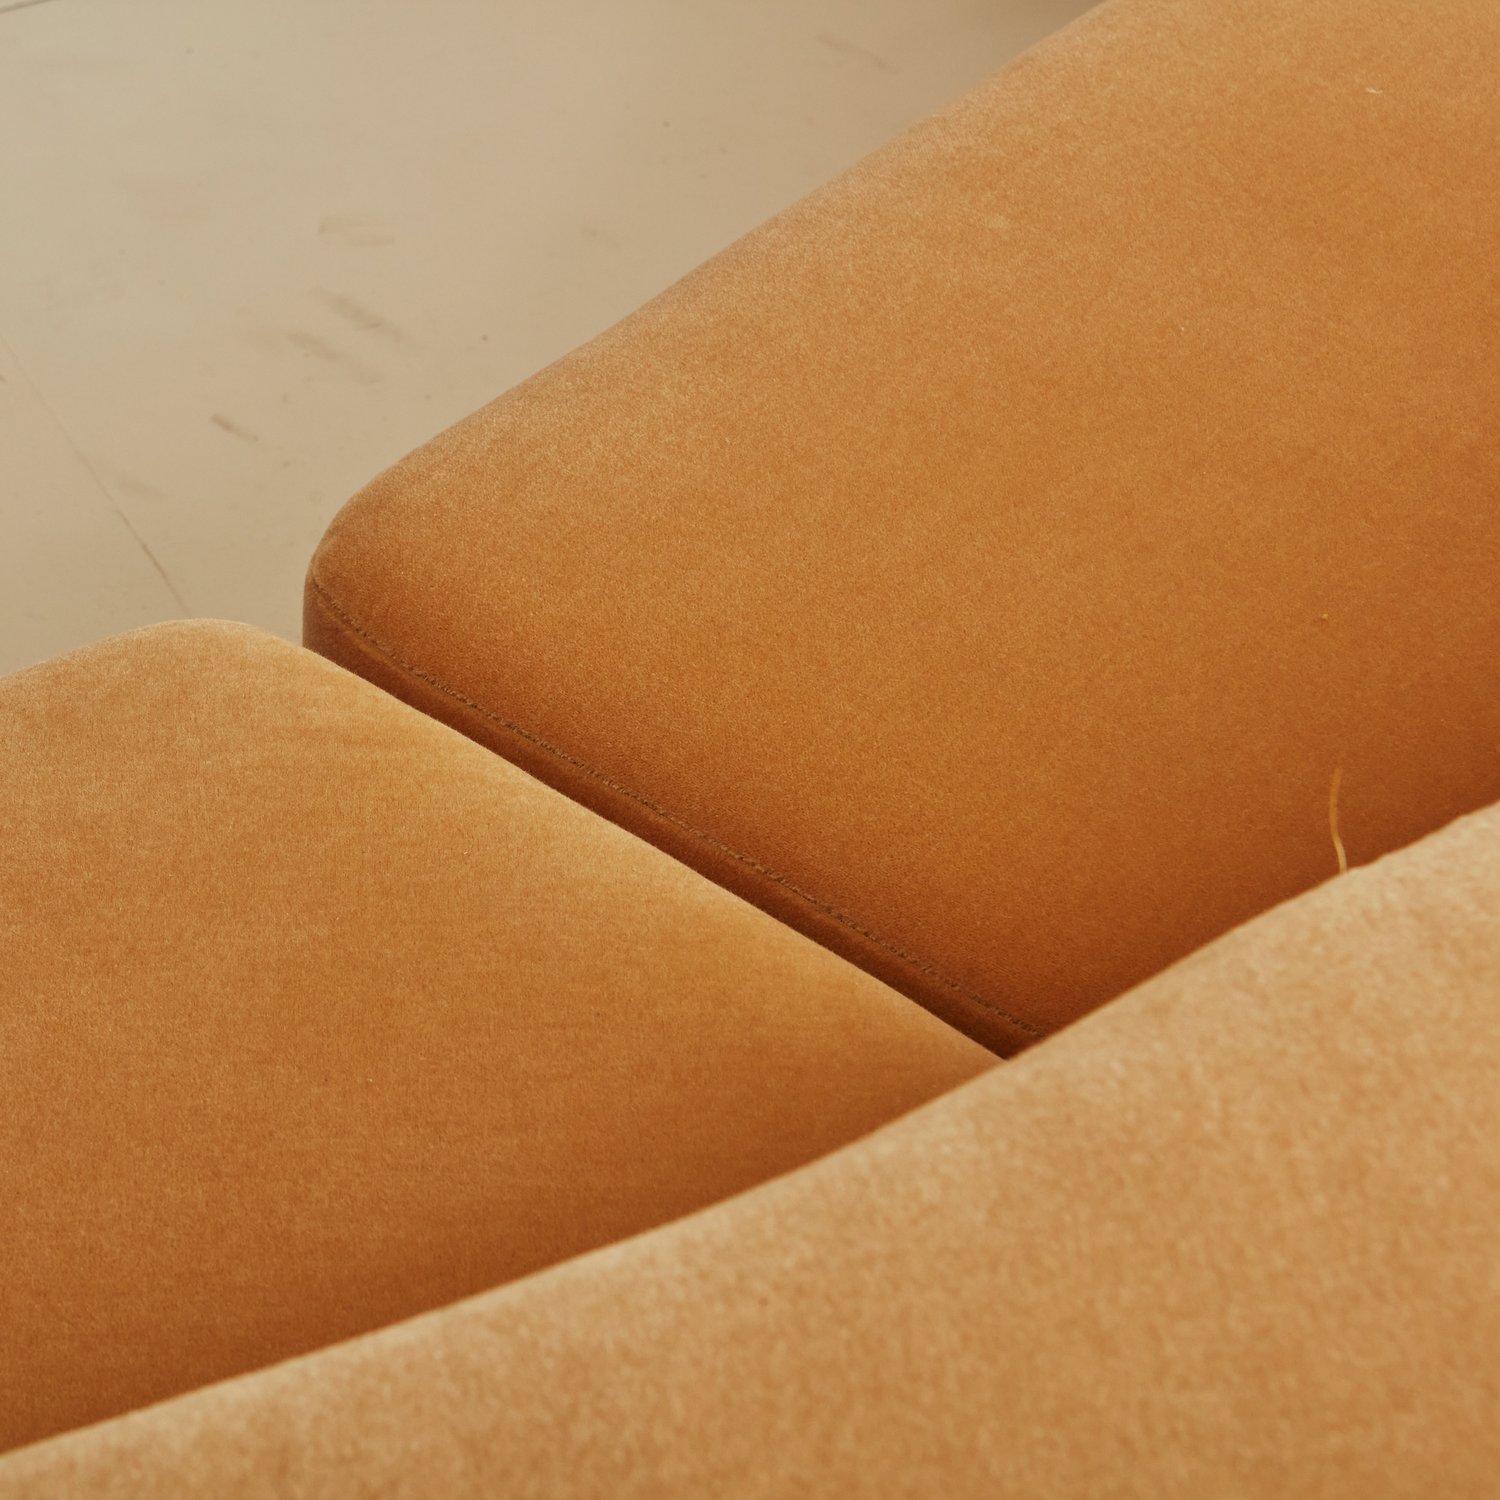 Modular Sofa in Golden Mohair in the Style of the 